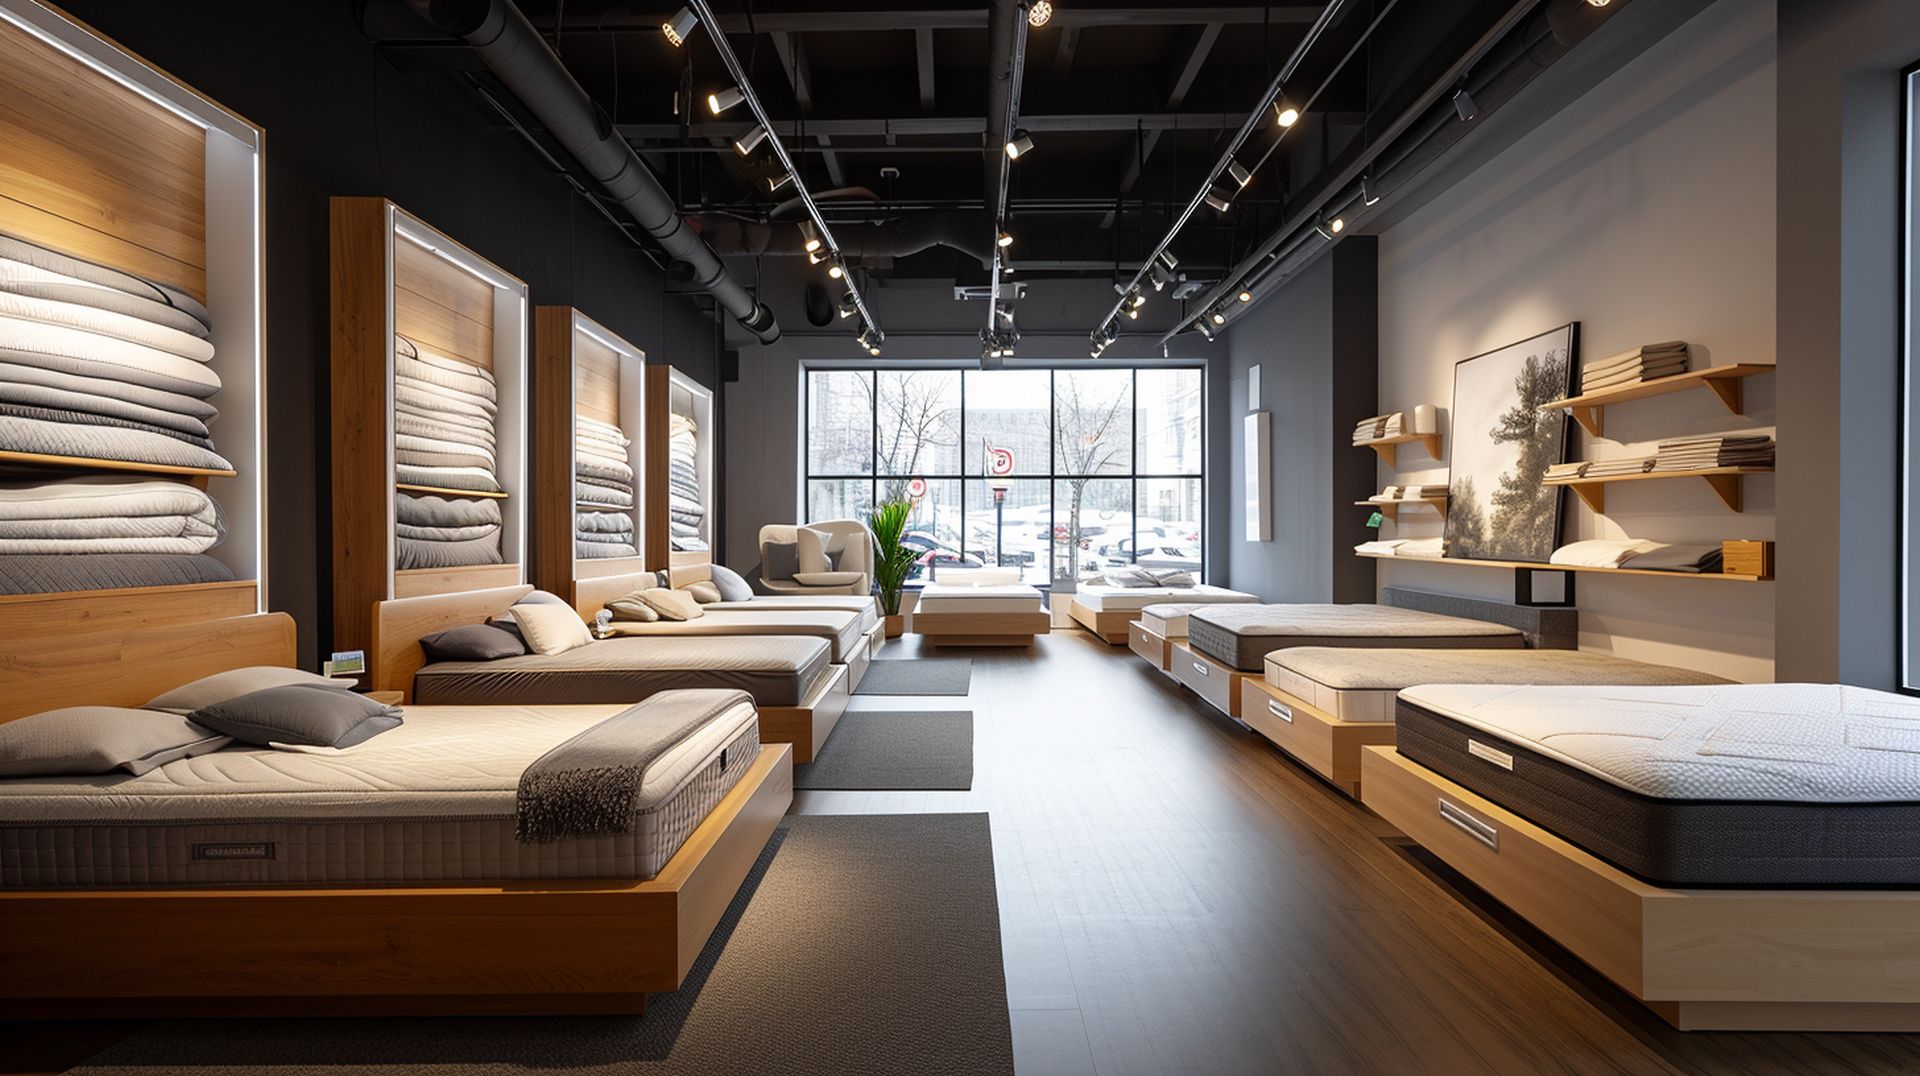 If you're looking for a new bed, mattress stores in Stamford offer the best customer and delivery service, financing, and warranties in Connecticut